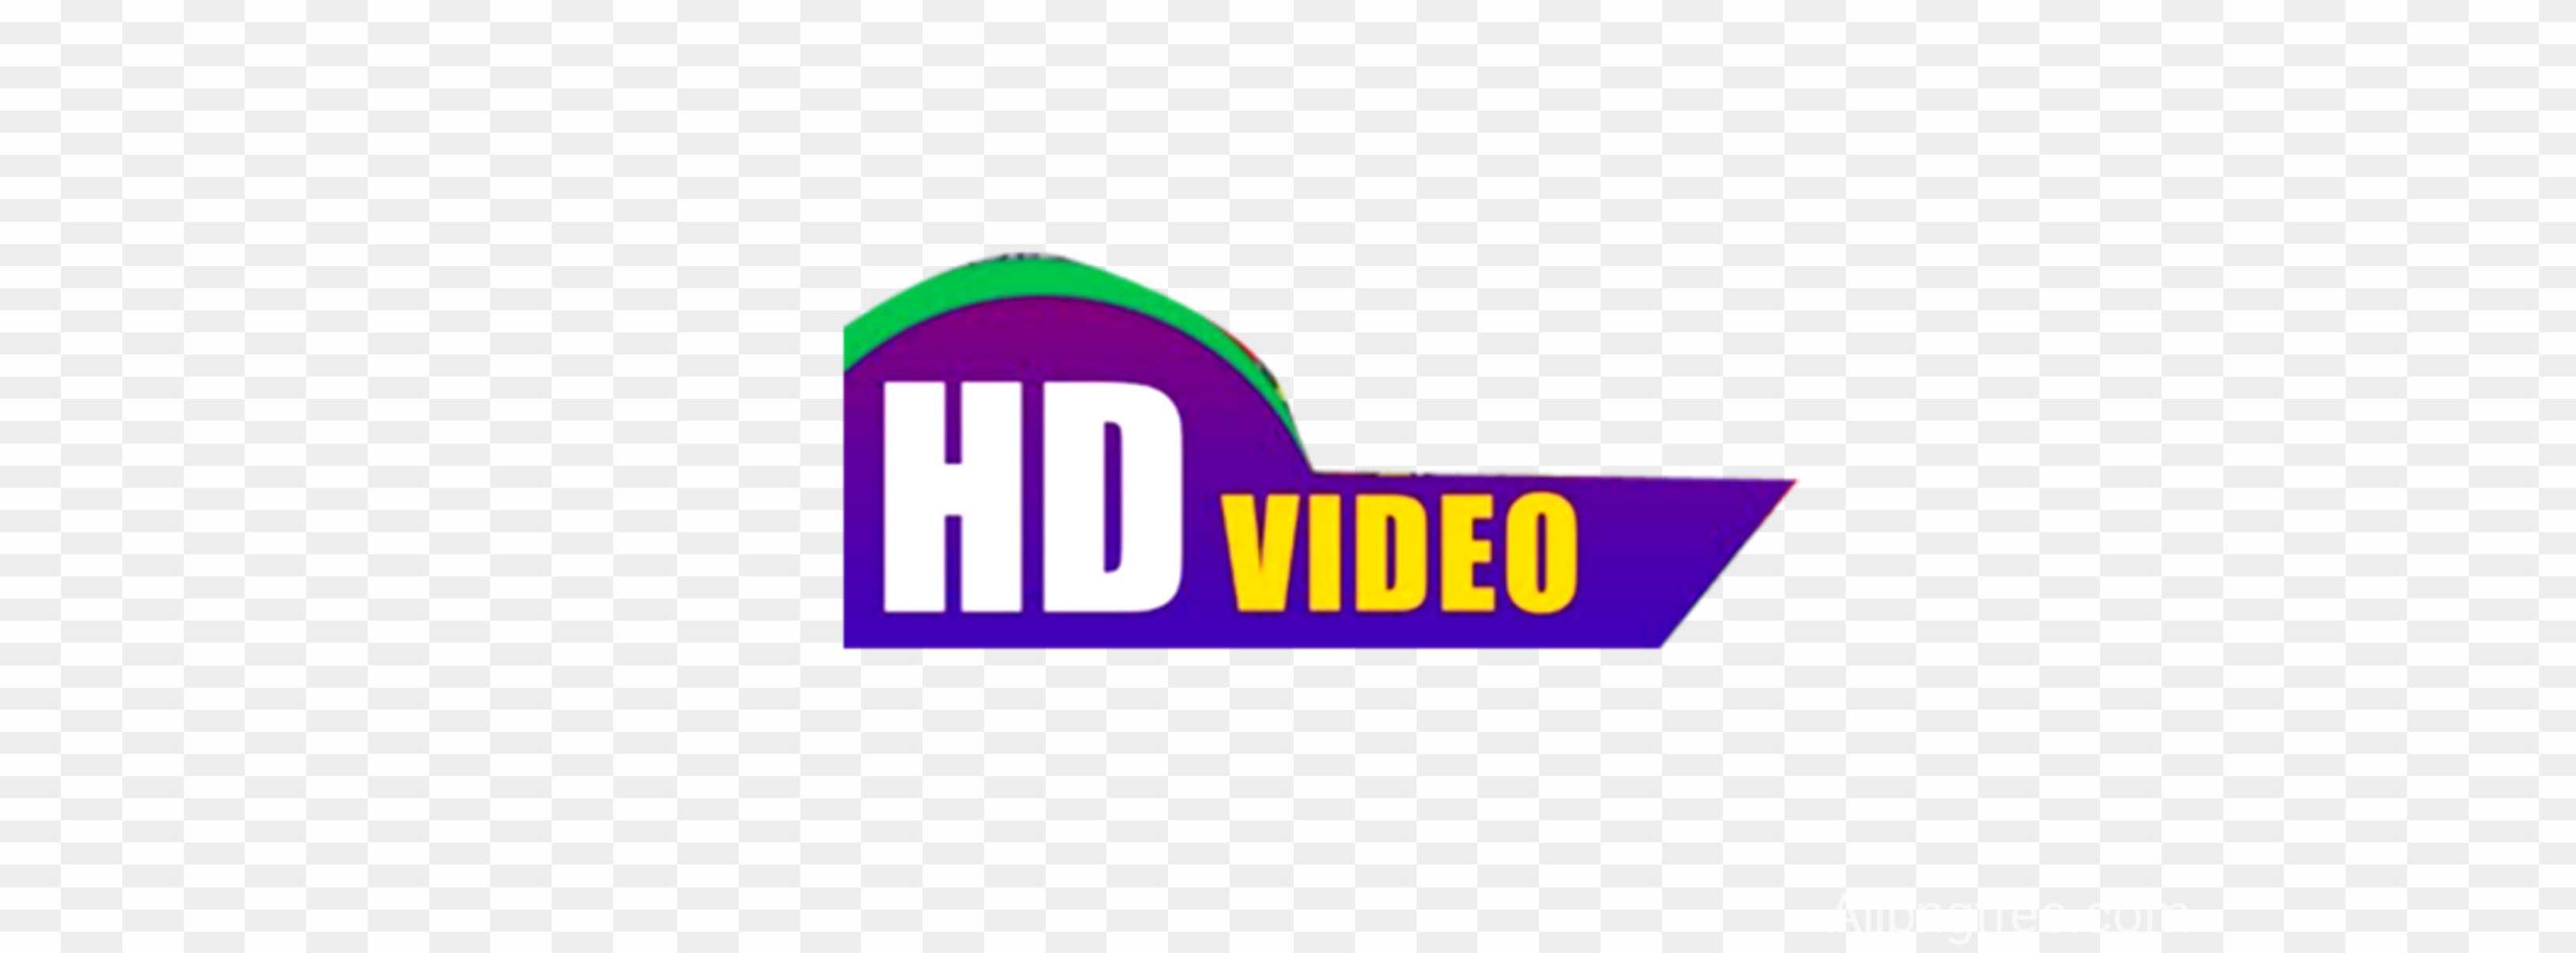 Hd video PNG images download